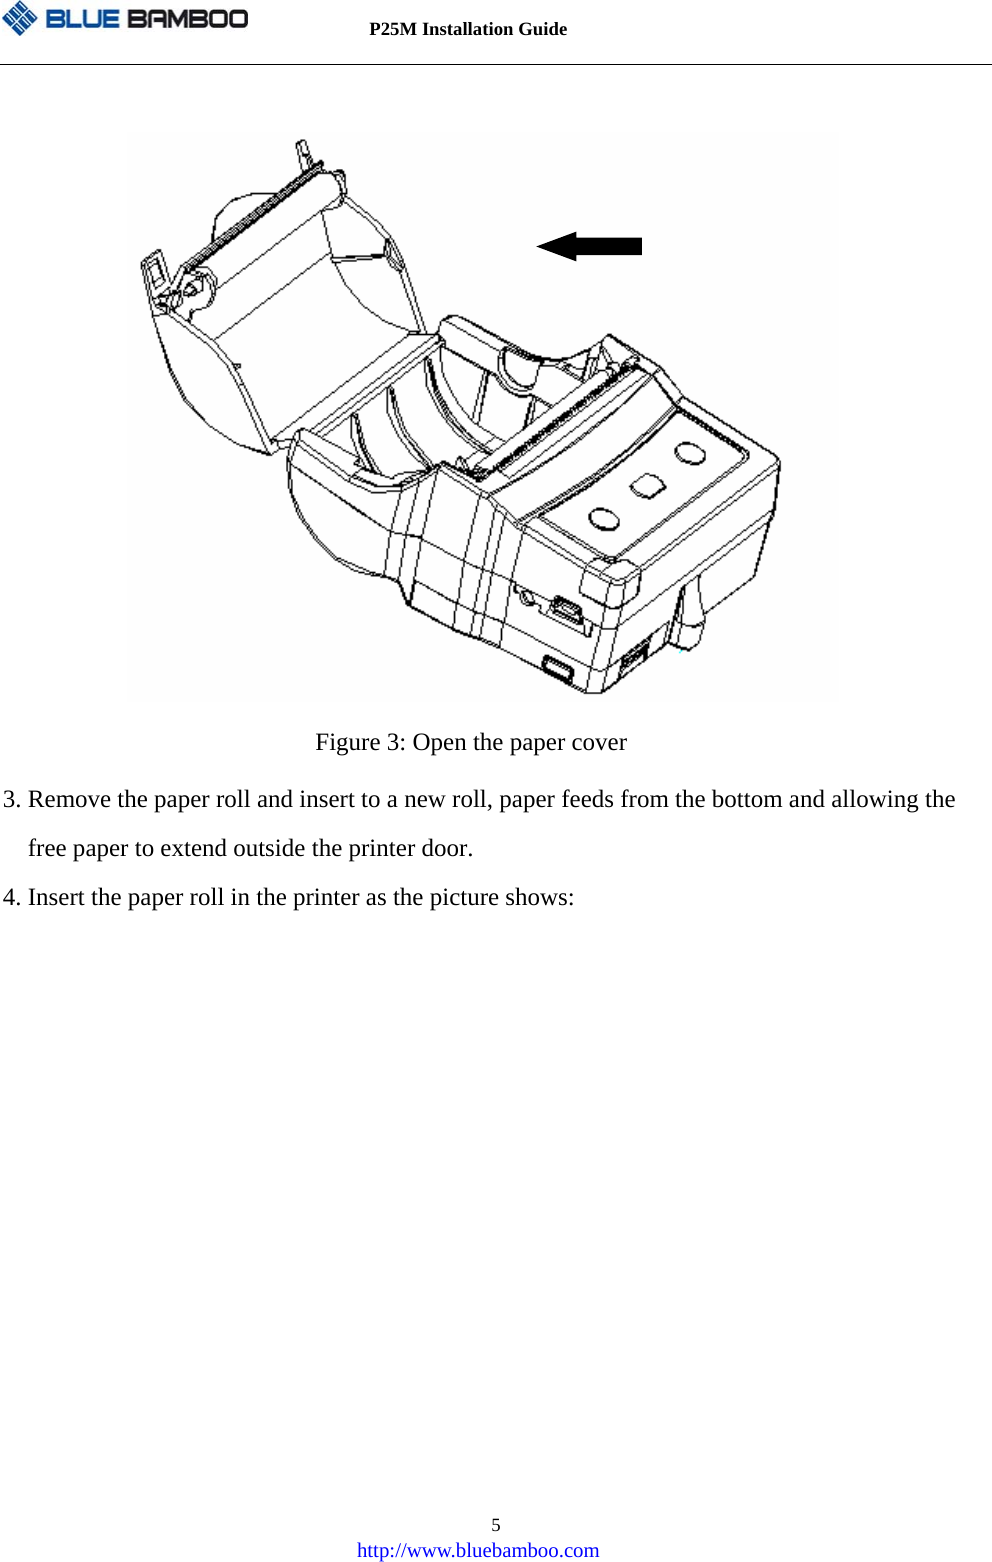          P25M Installation Guide   http://www.bluebamboo.com 5            Figure 3: Open the paper cover 3. Remove the paper roll and insert to a new roll, paper feeds from the bottom and allowing the free paper to extend outside the printer door. 4. Insert the paper roll in the printer as the picture shows: 